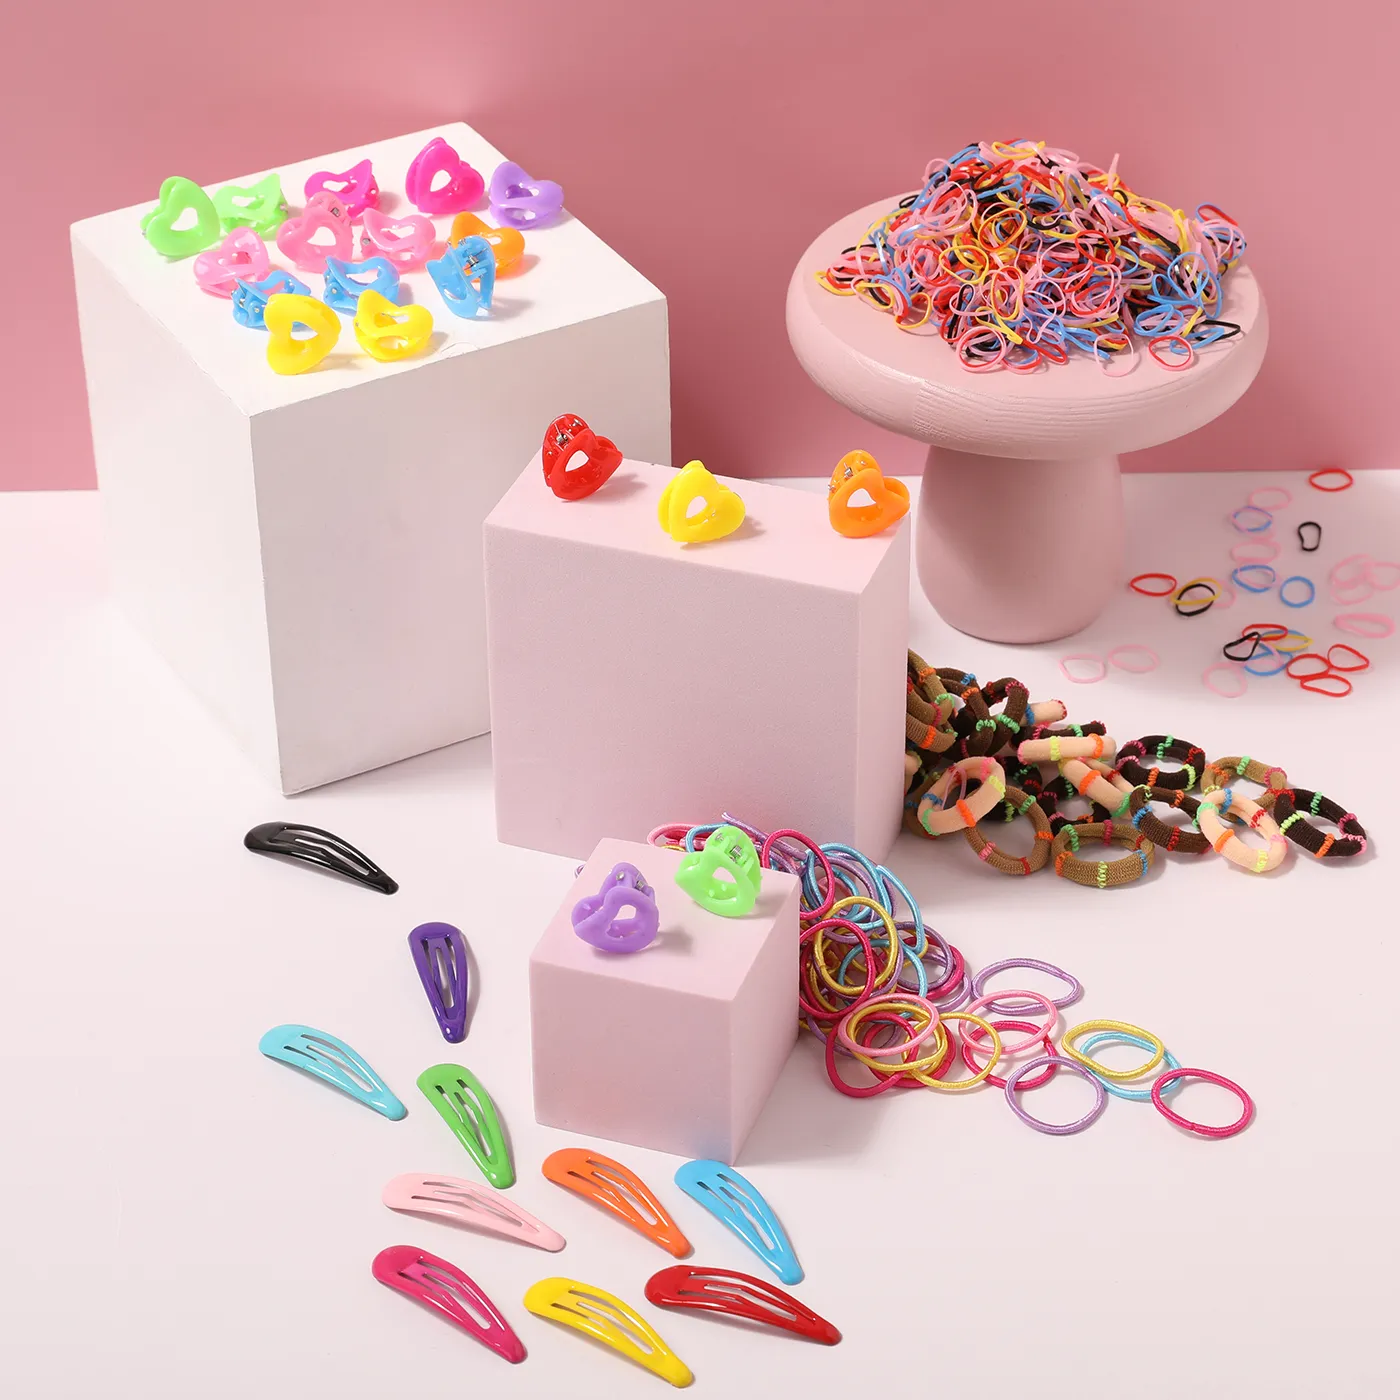 1180-pack Multi-Style Hair Ties and Hair Clips Hair Accessory Sets for Girls